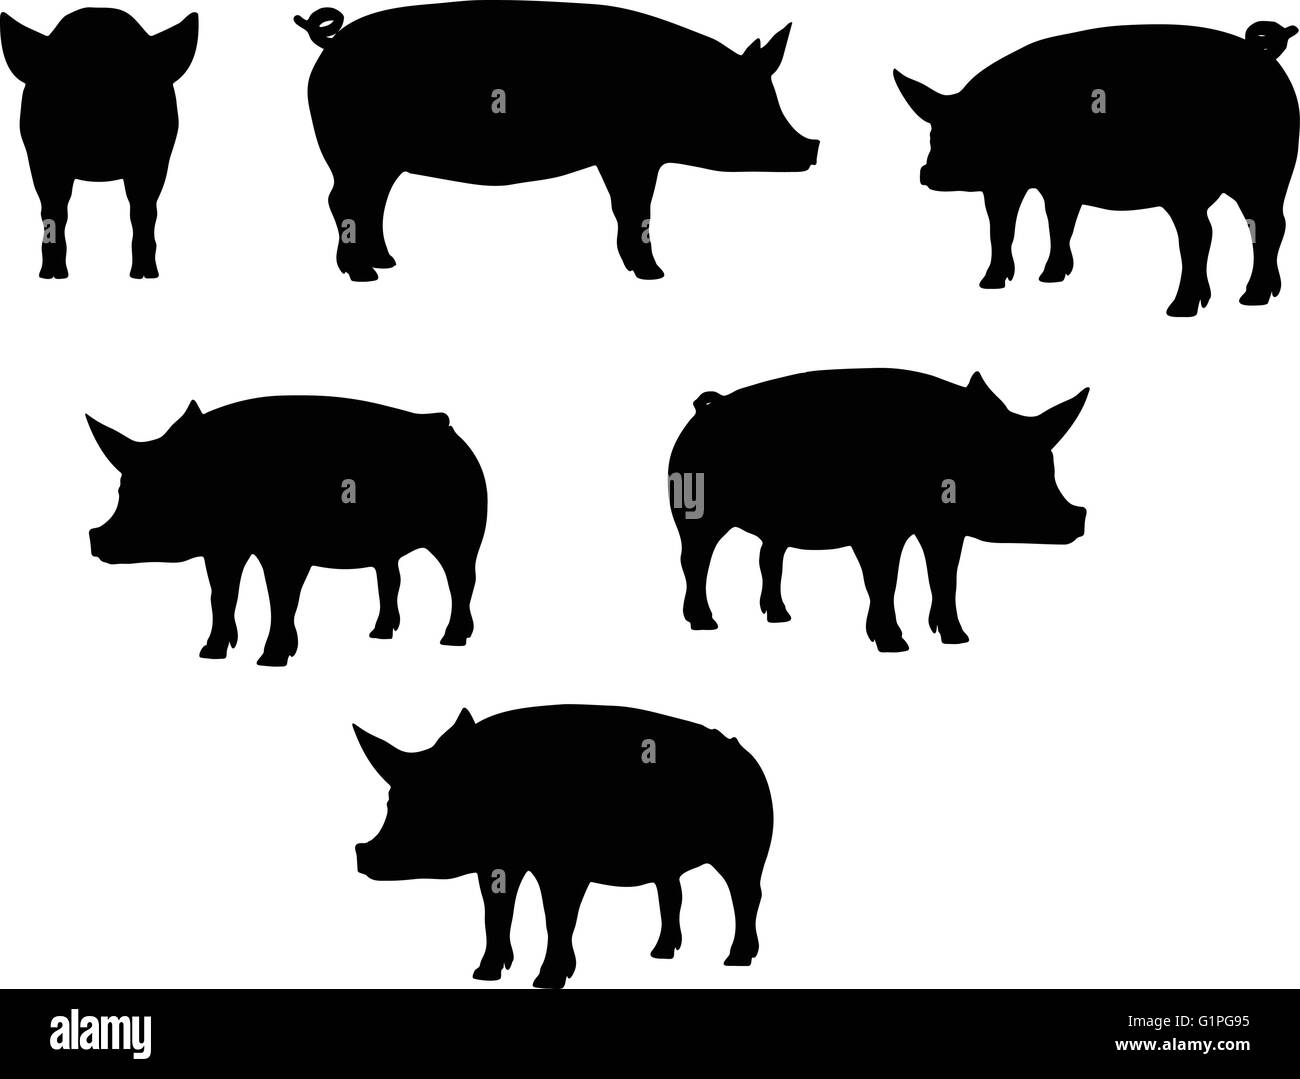 Vector Image, pig silhouette, in Curl Tail pose, isolated on white background Stock Vector